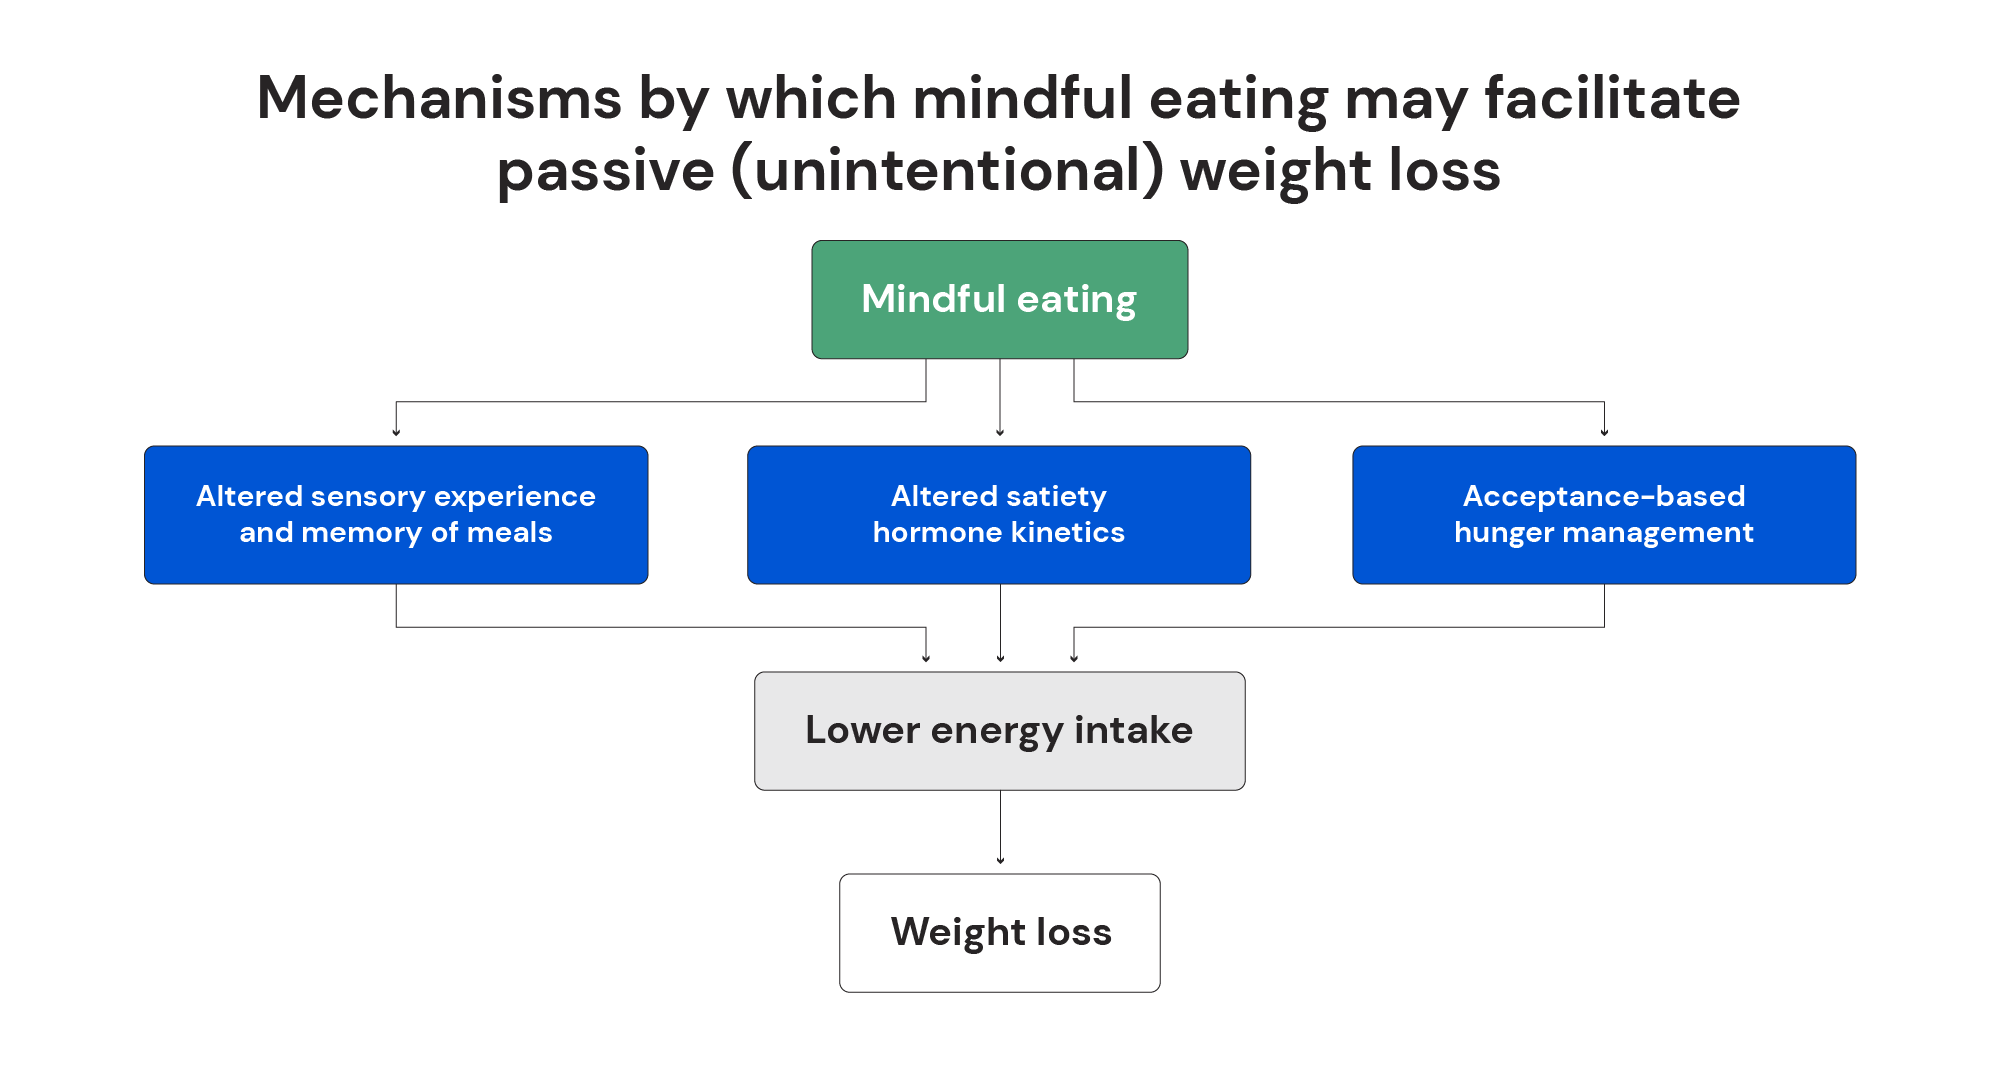 Caloric intake and mindful eating